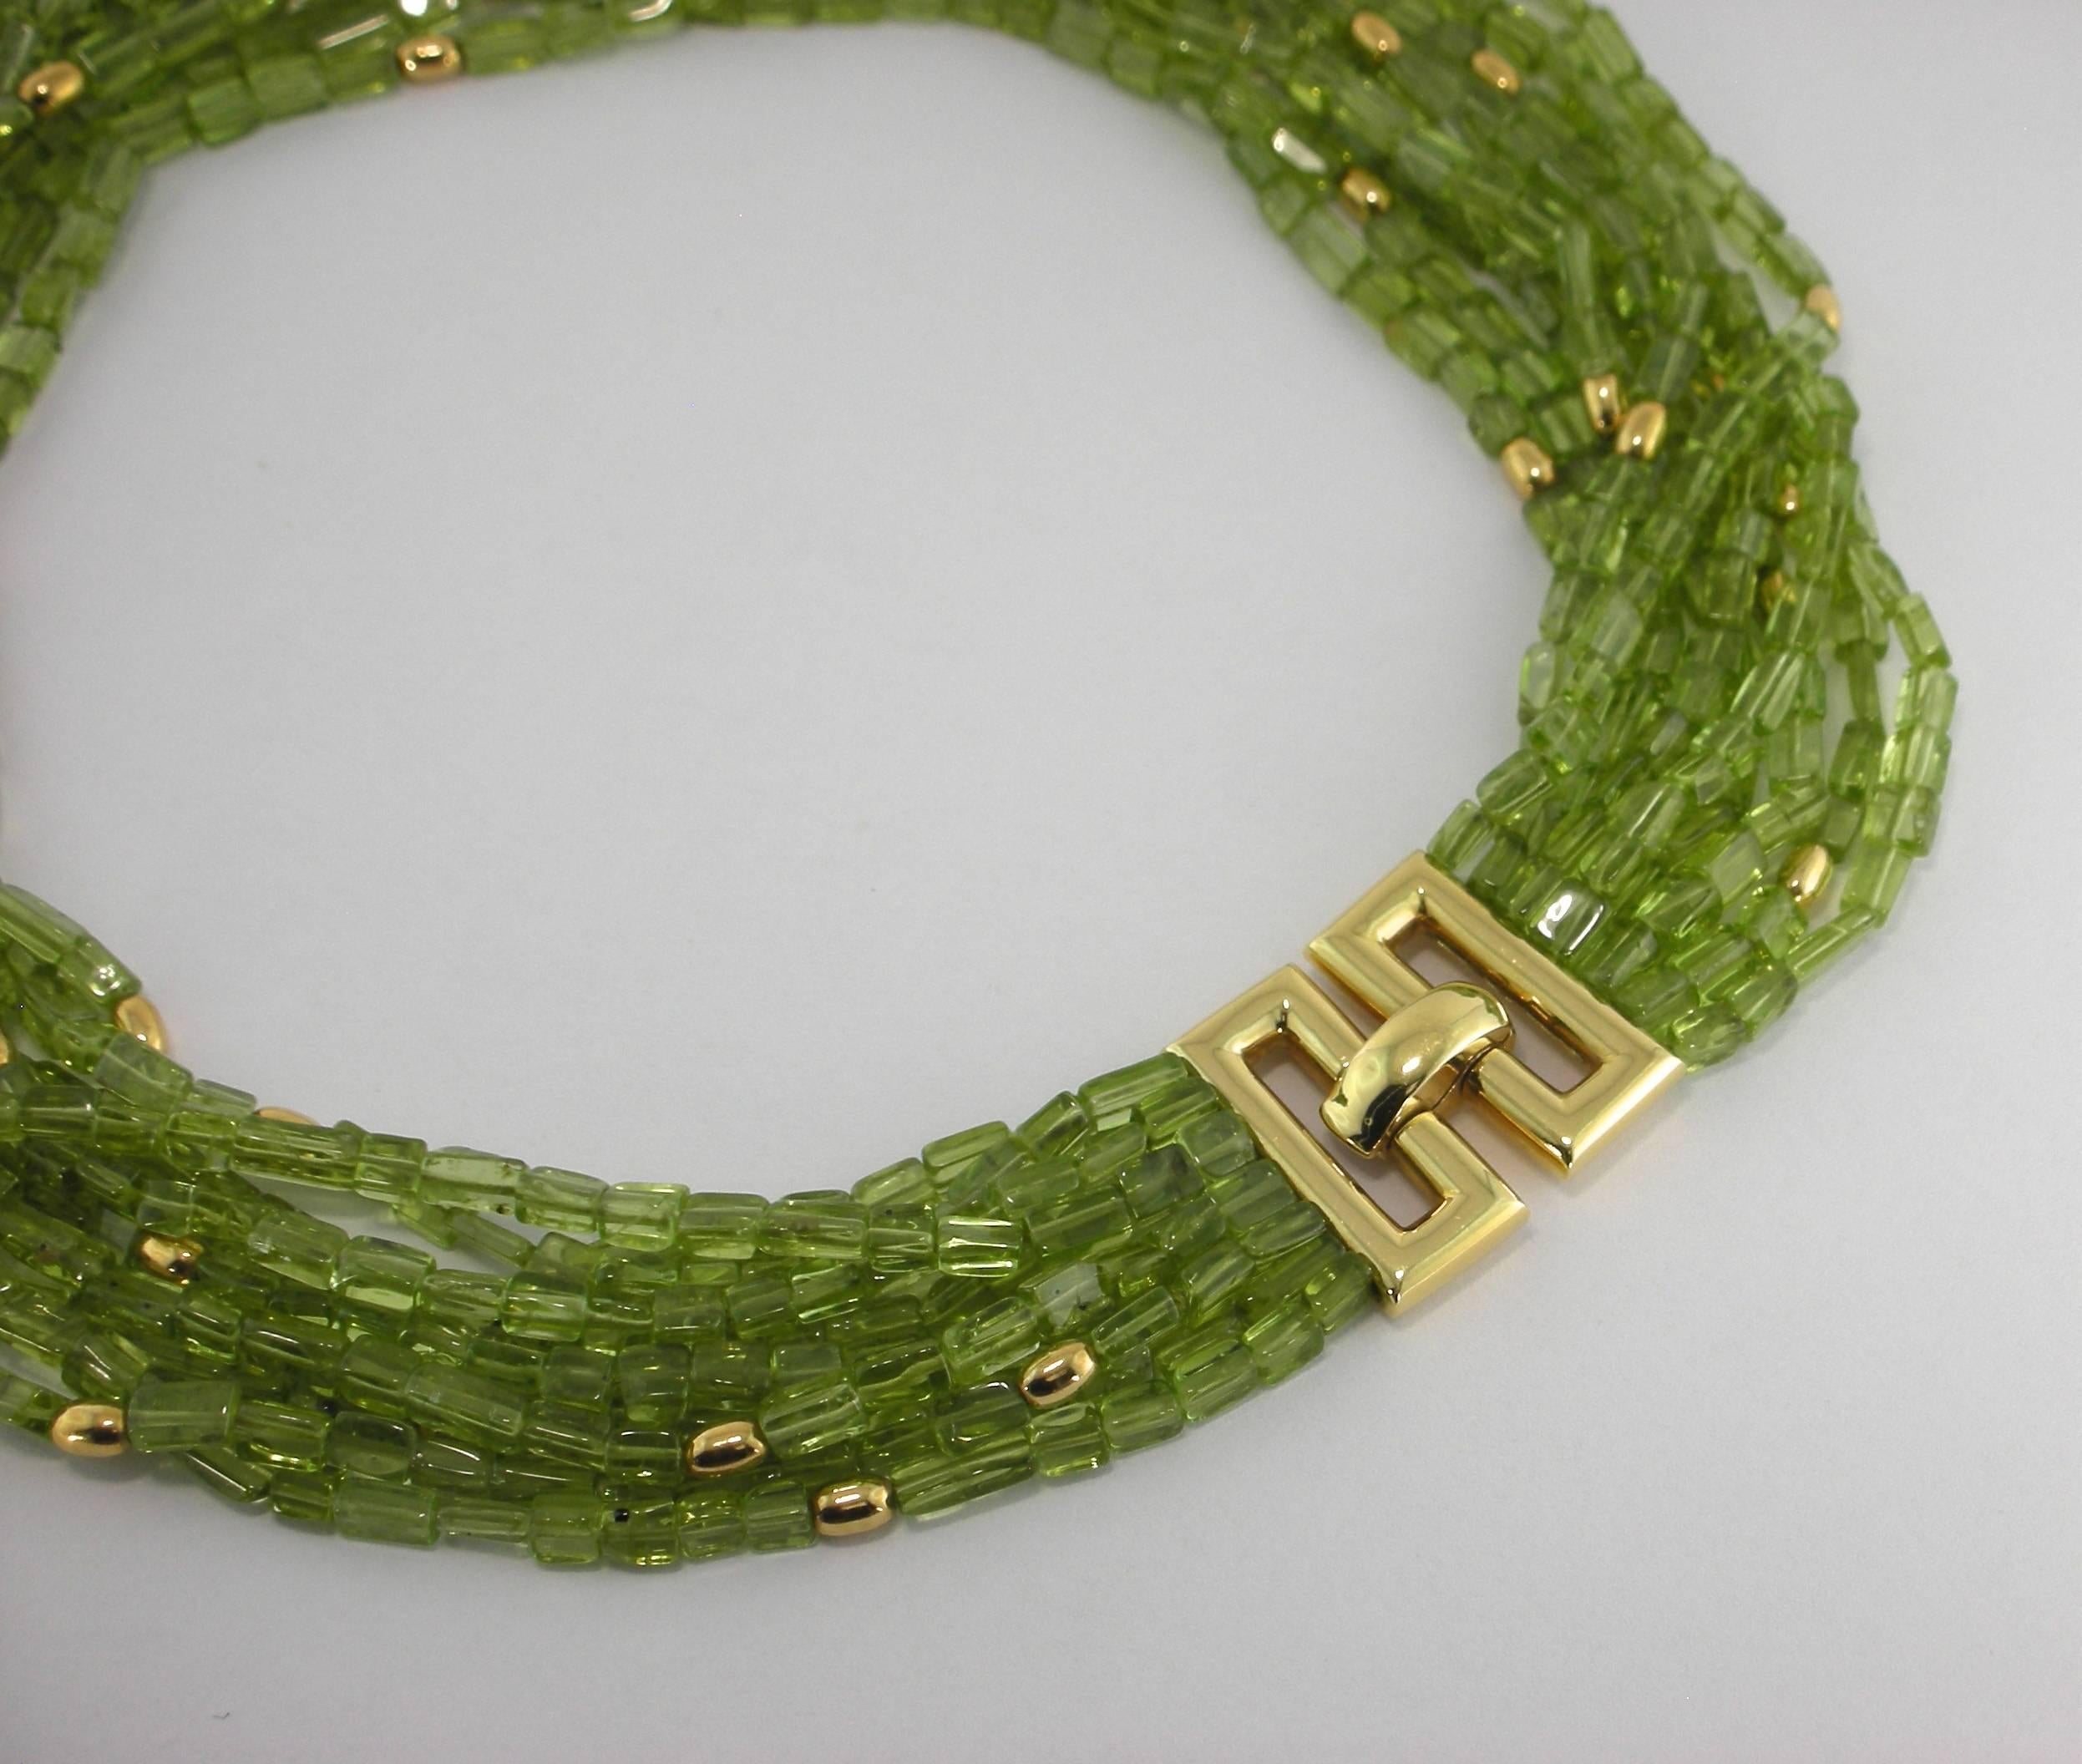 Jona design collection, hand crafted in Italy, 18 karat yellow gold multi-strand necklace, featuring 500 carats of peridot.

All of our jewelry is new and has never been previously owned or worn.